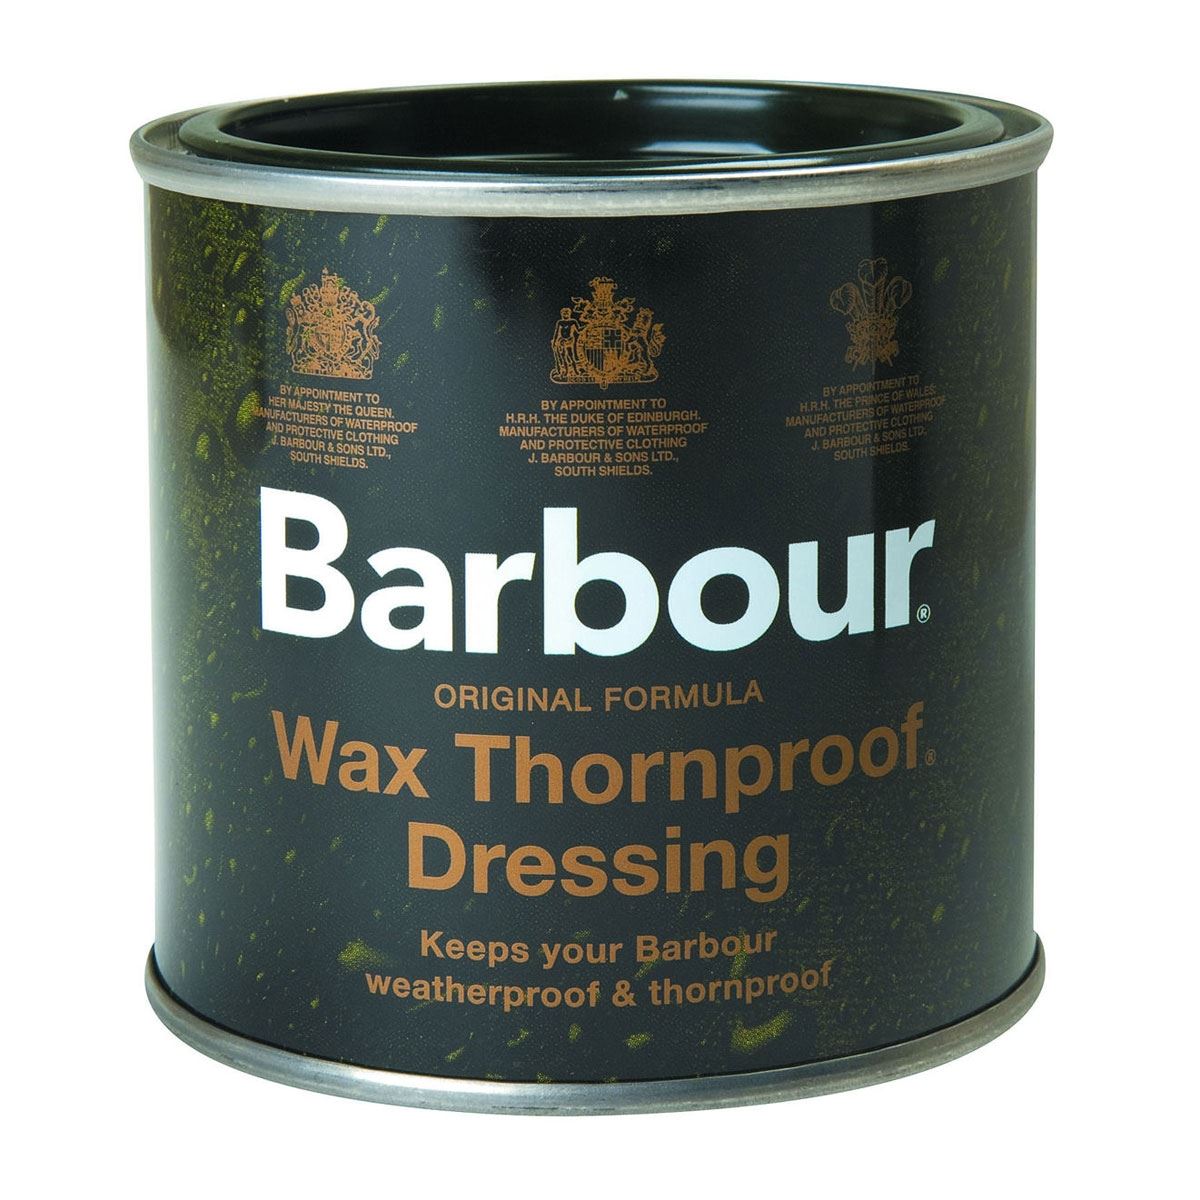 What's an alternative to applying barbour wax for jacket maintenance?